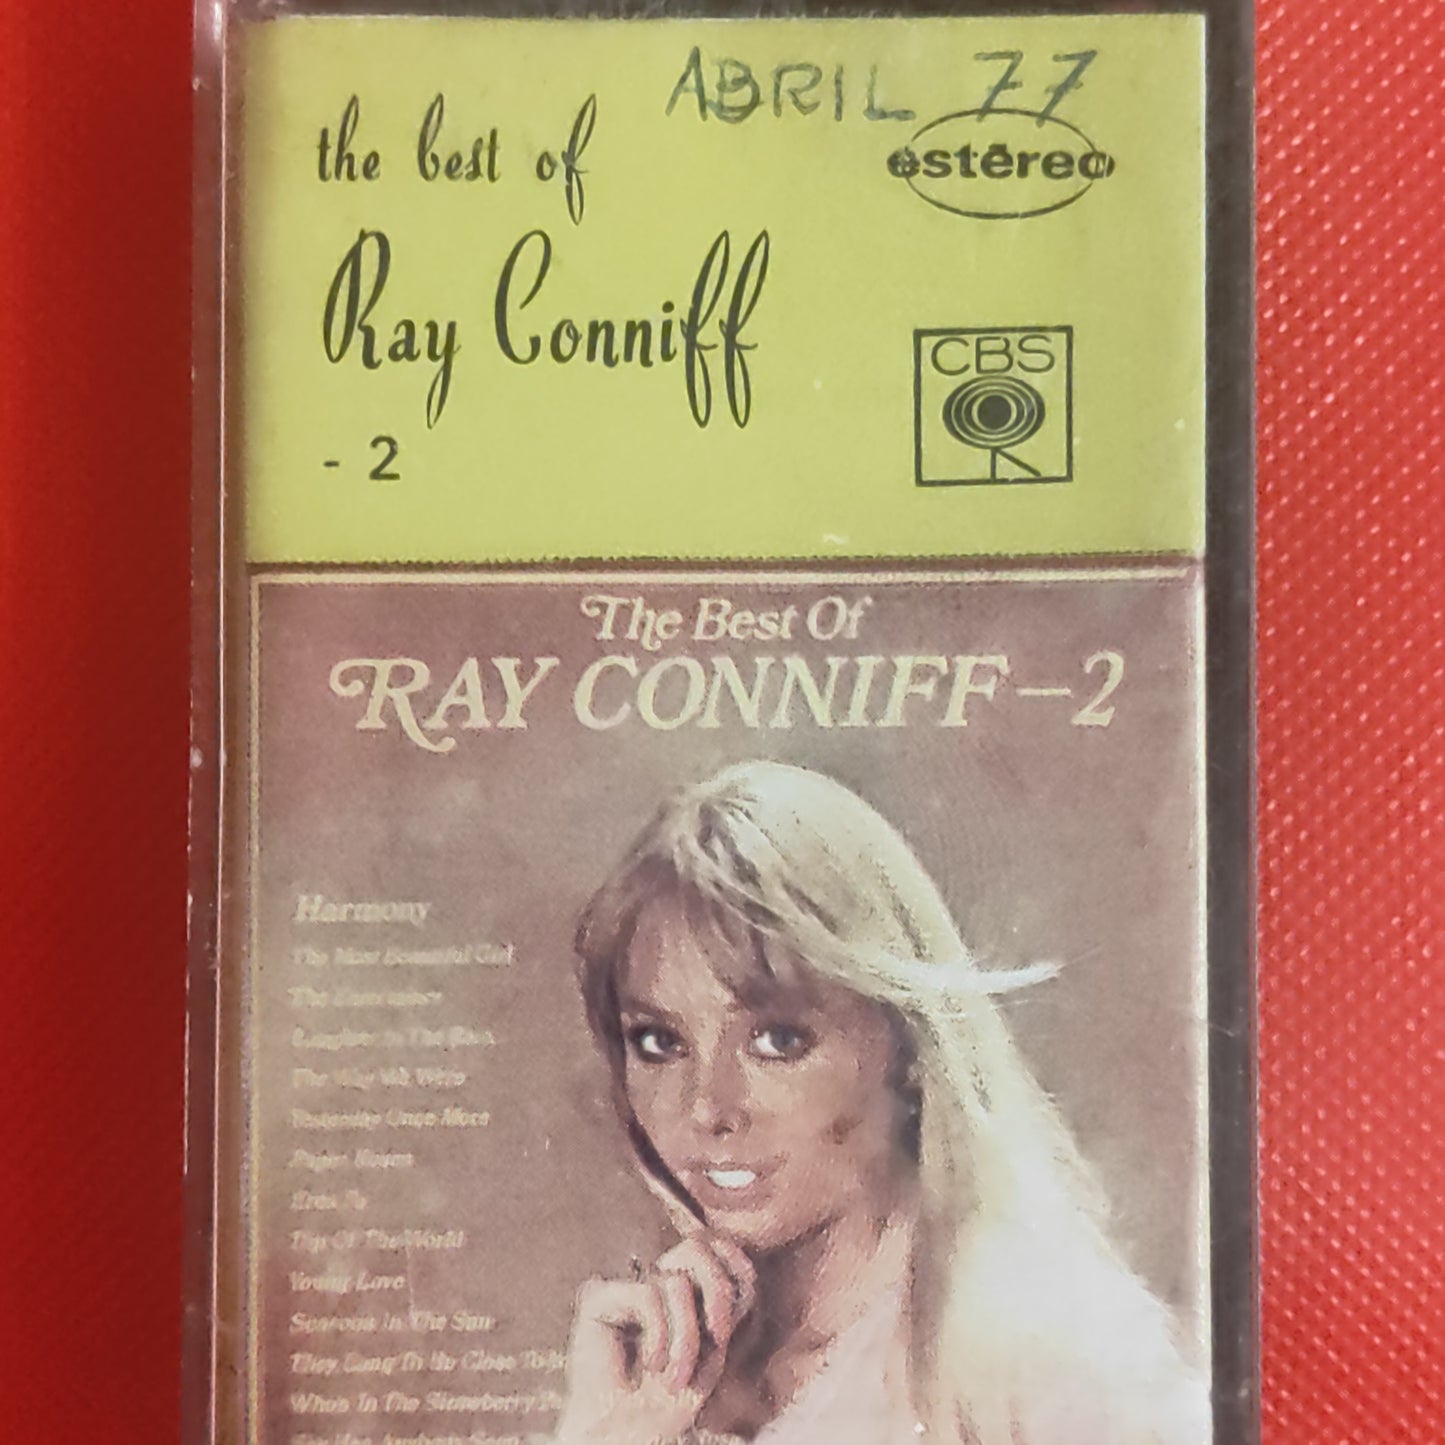 The Best of Ray Conniff - 2